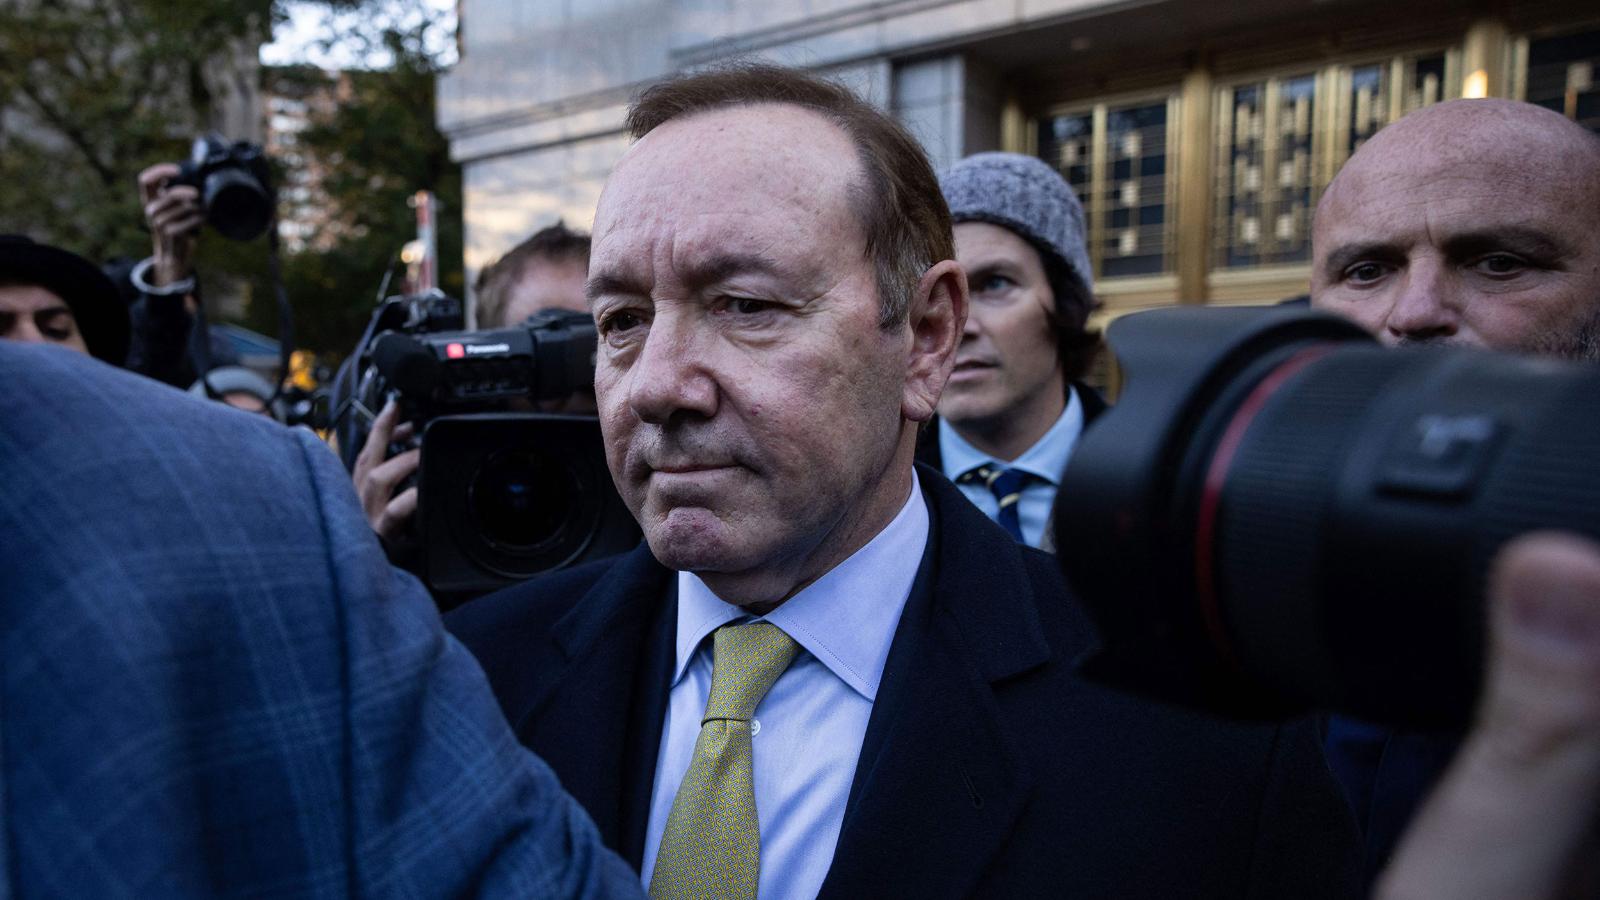 Actor Kevin Spacey Faces New Charges For Sexual Assault Offenses In The Uk The Limited Times